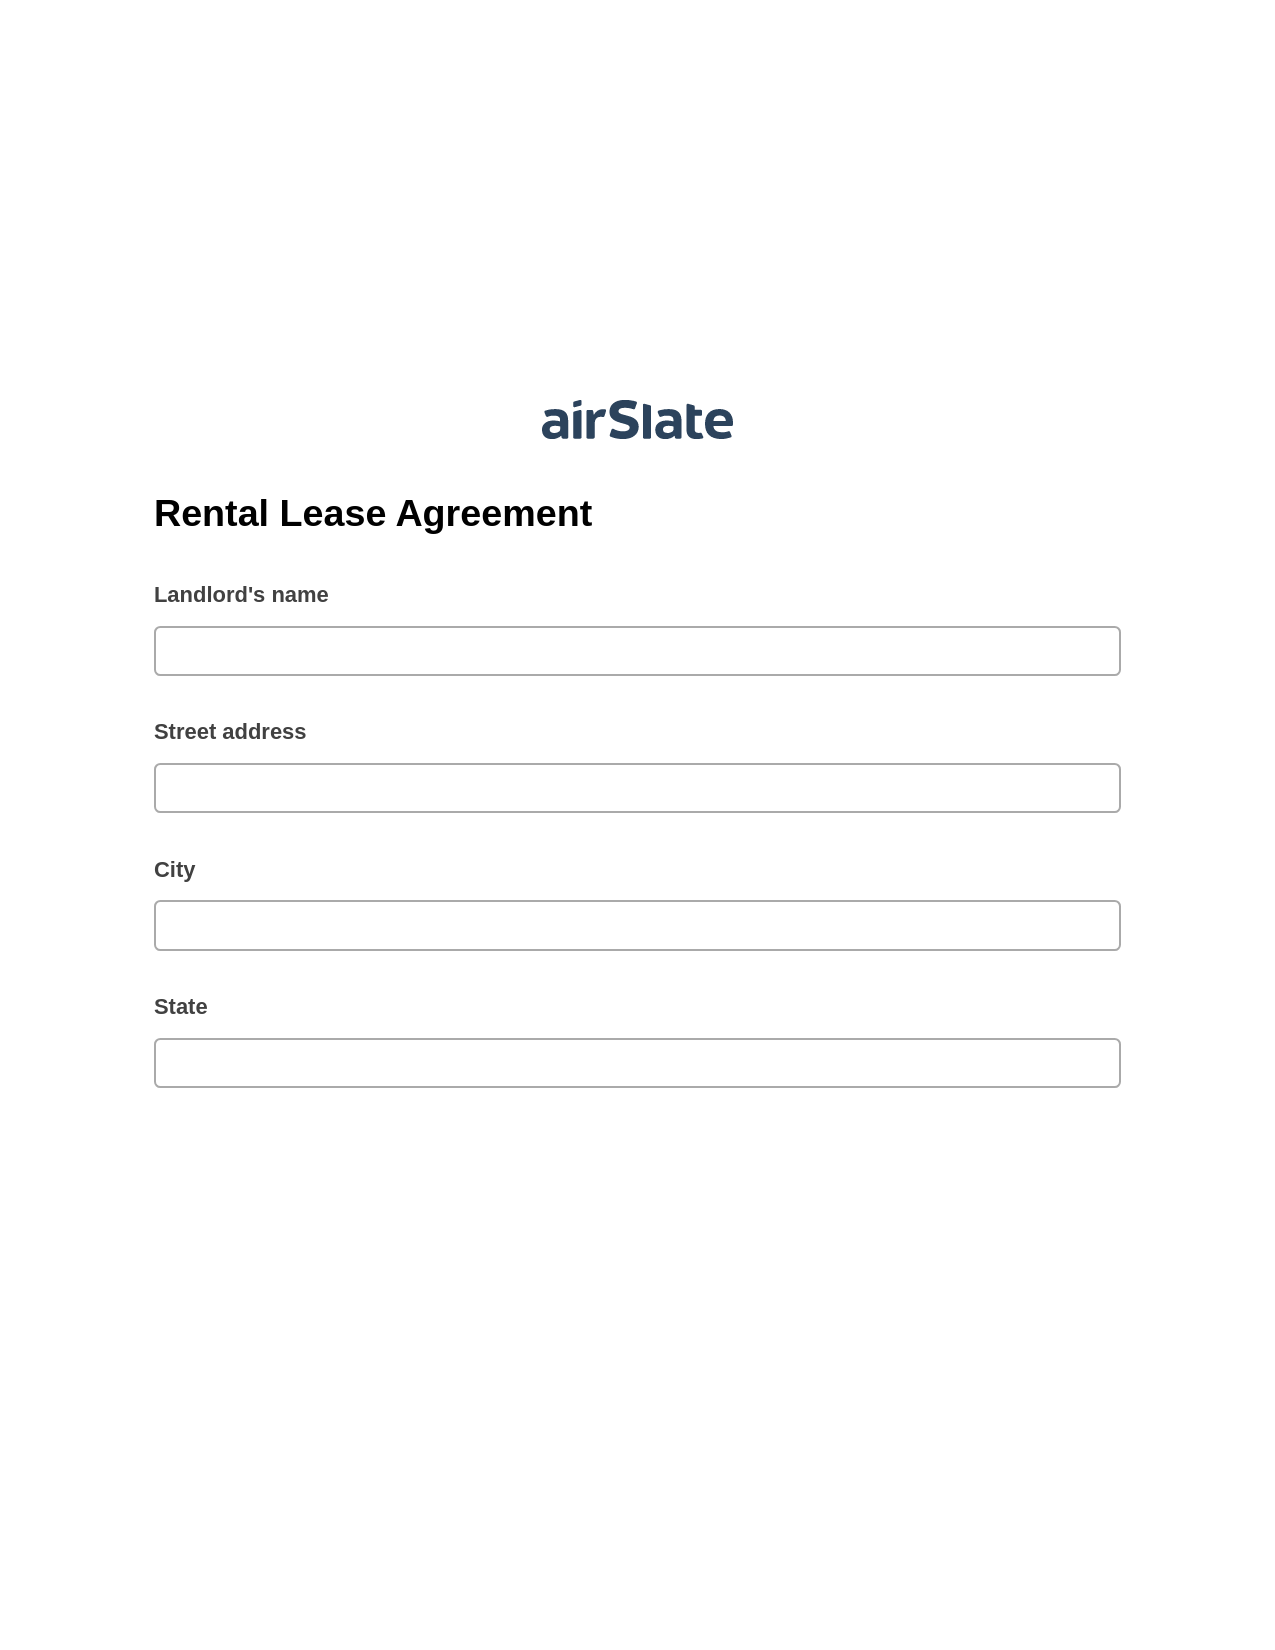 Rental Lease Agreement Pre-fill from CSV File Dropdown Options Bot, Create QuickBooks invoice Bot, Export to Salesforce Bot